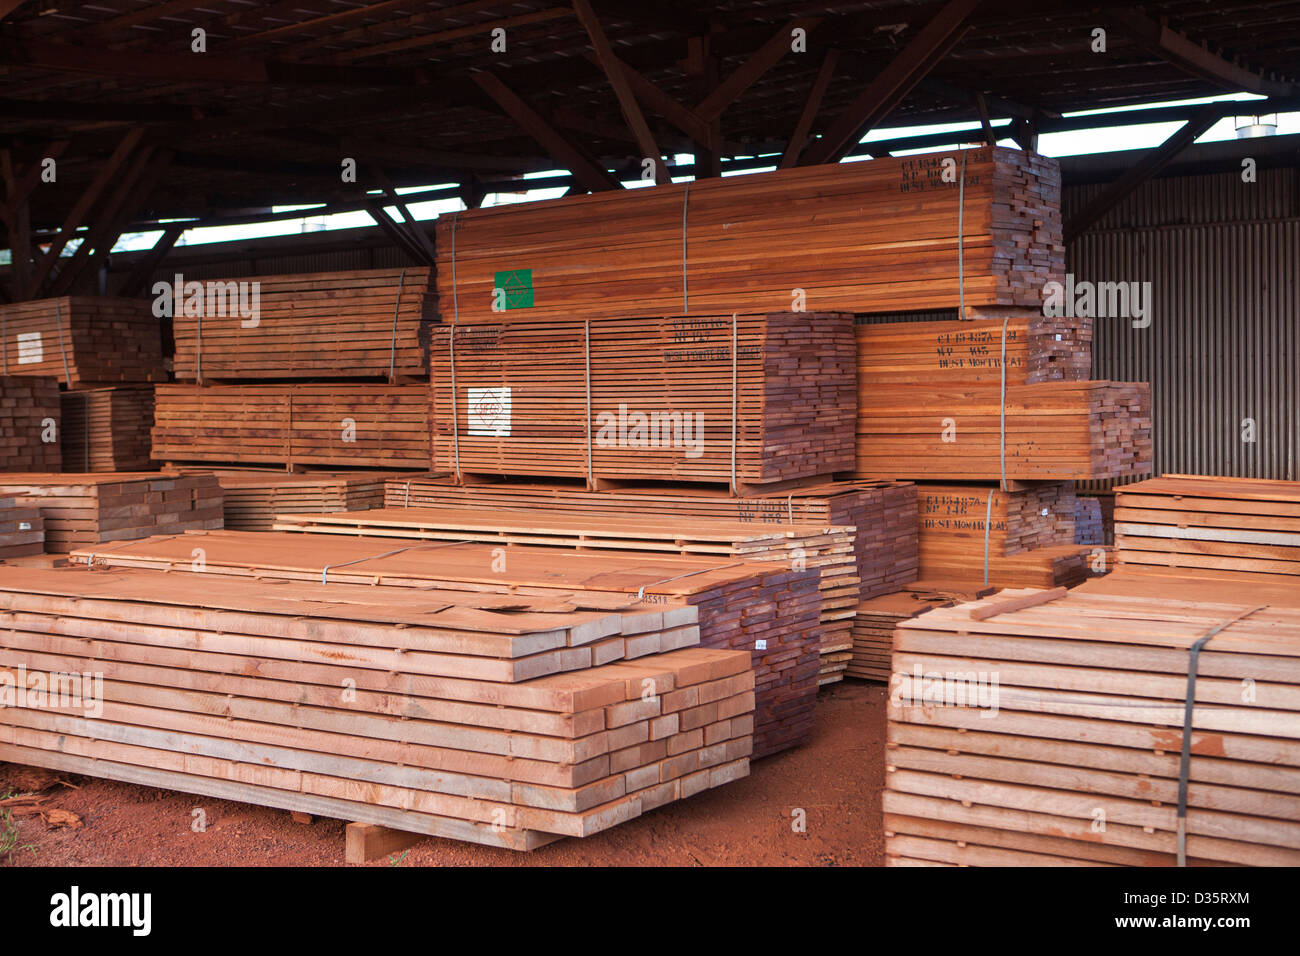 CONGO, 27th Sept 2012: Cut hardwood timber in a logging concession's timber yard awaiting shipment out of the country for export. Stock Photo